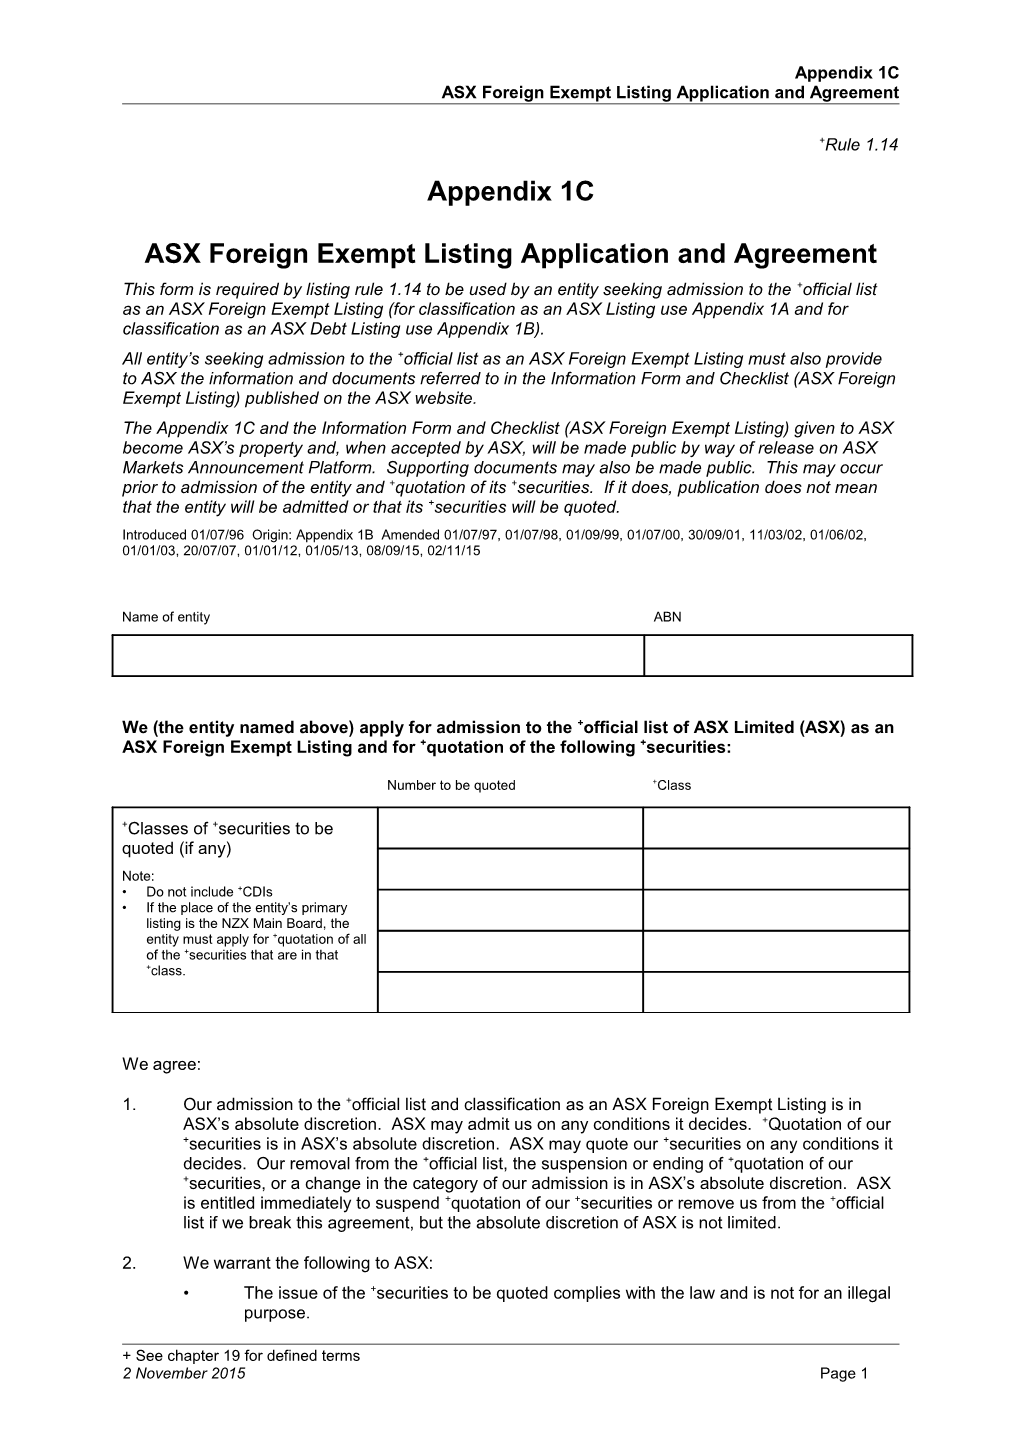 ASX Listing Rules Appendix 1C - ASX Foreign Exempt Listing Application and Agreement